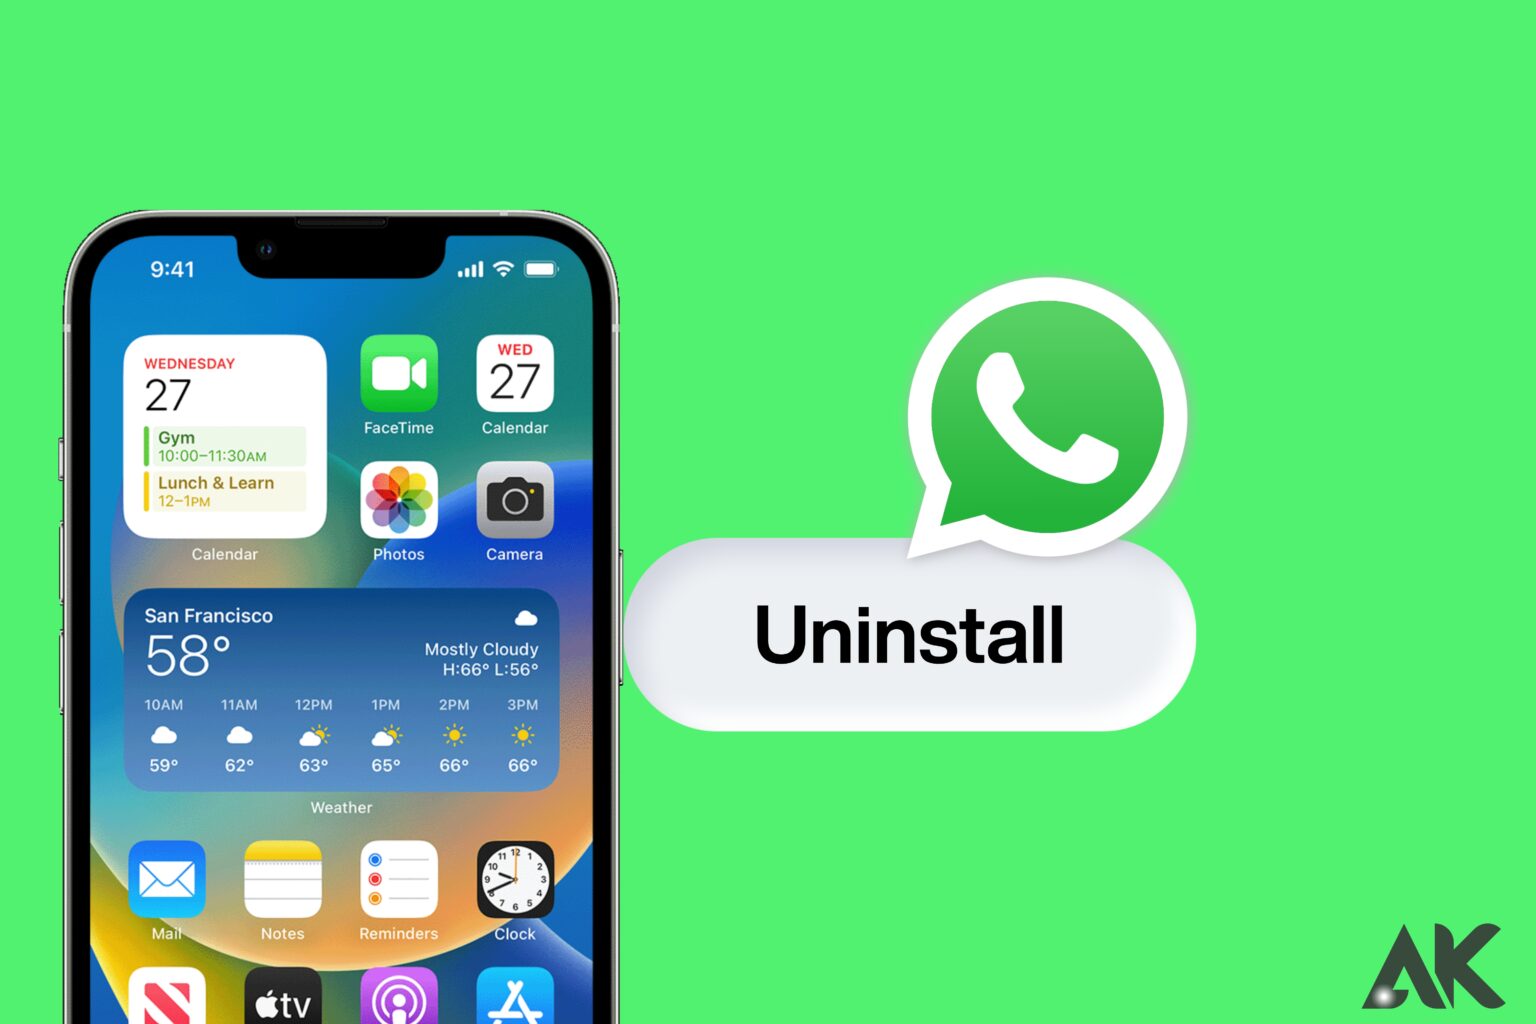 How to Uninstall WhatsApp on iPhone